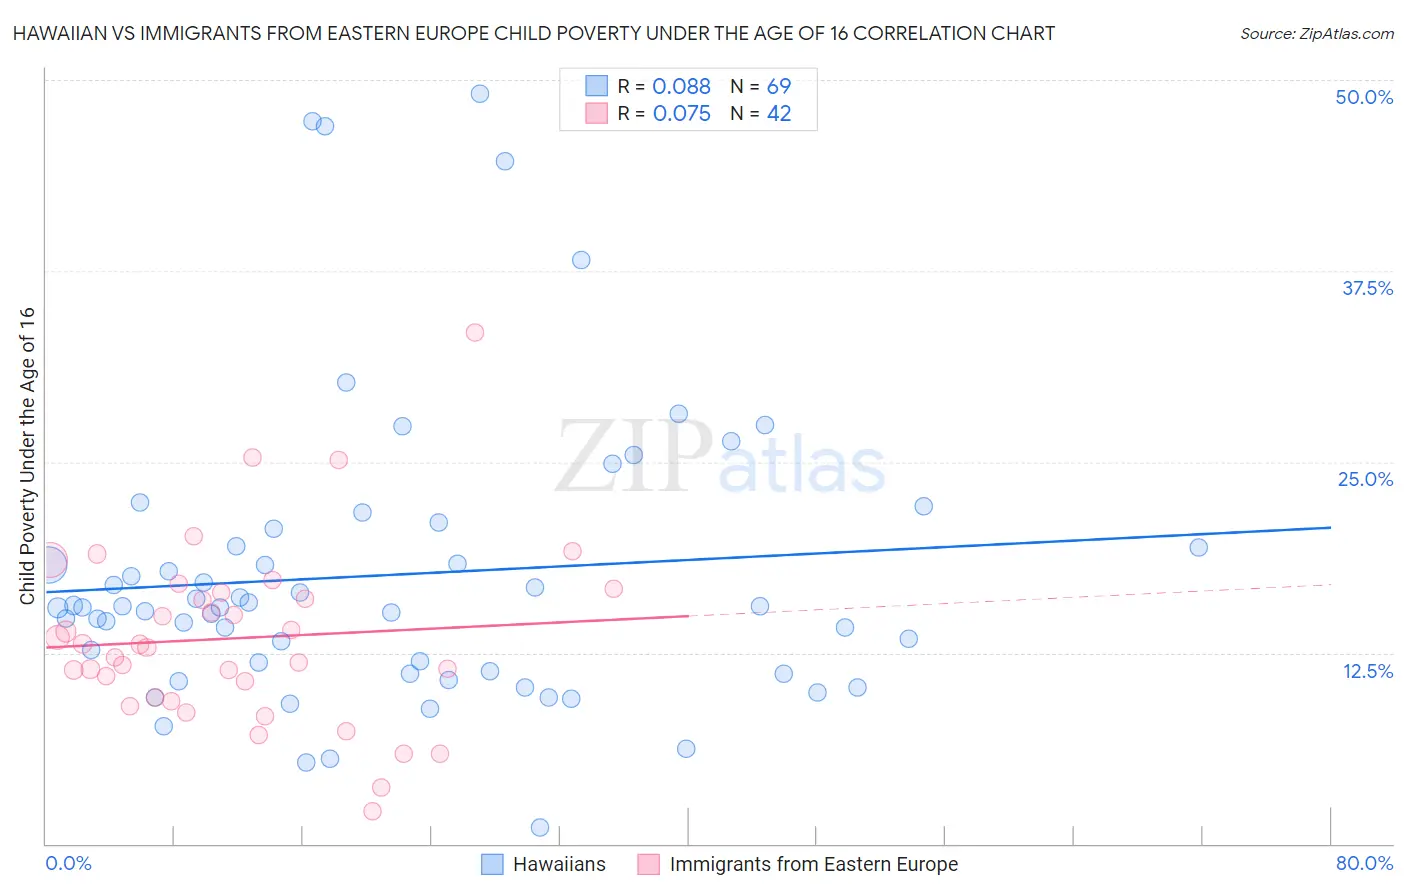 Hawaiian vs Immigrants from Eastern Europe Child Poverty Under the Age of 16